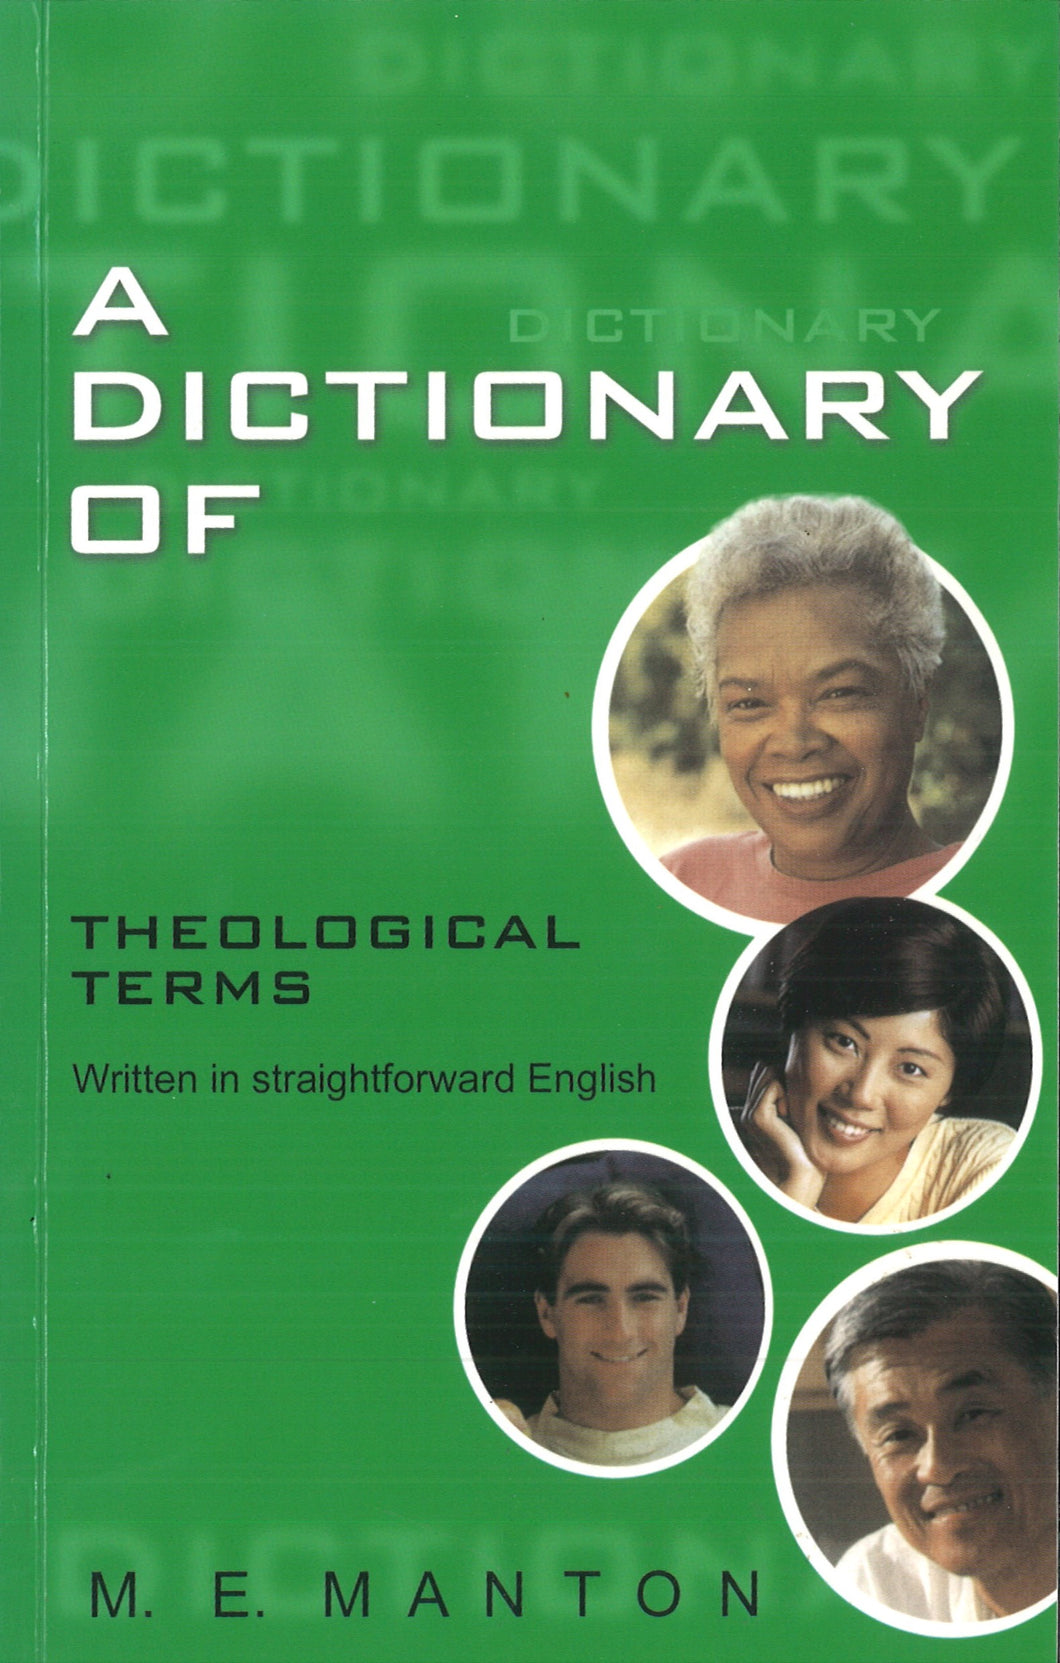 A Dictionary of Theological Terms - PDF Ebook